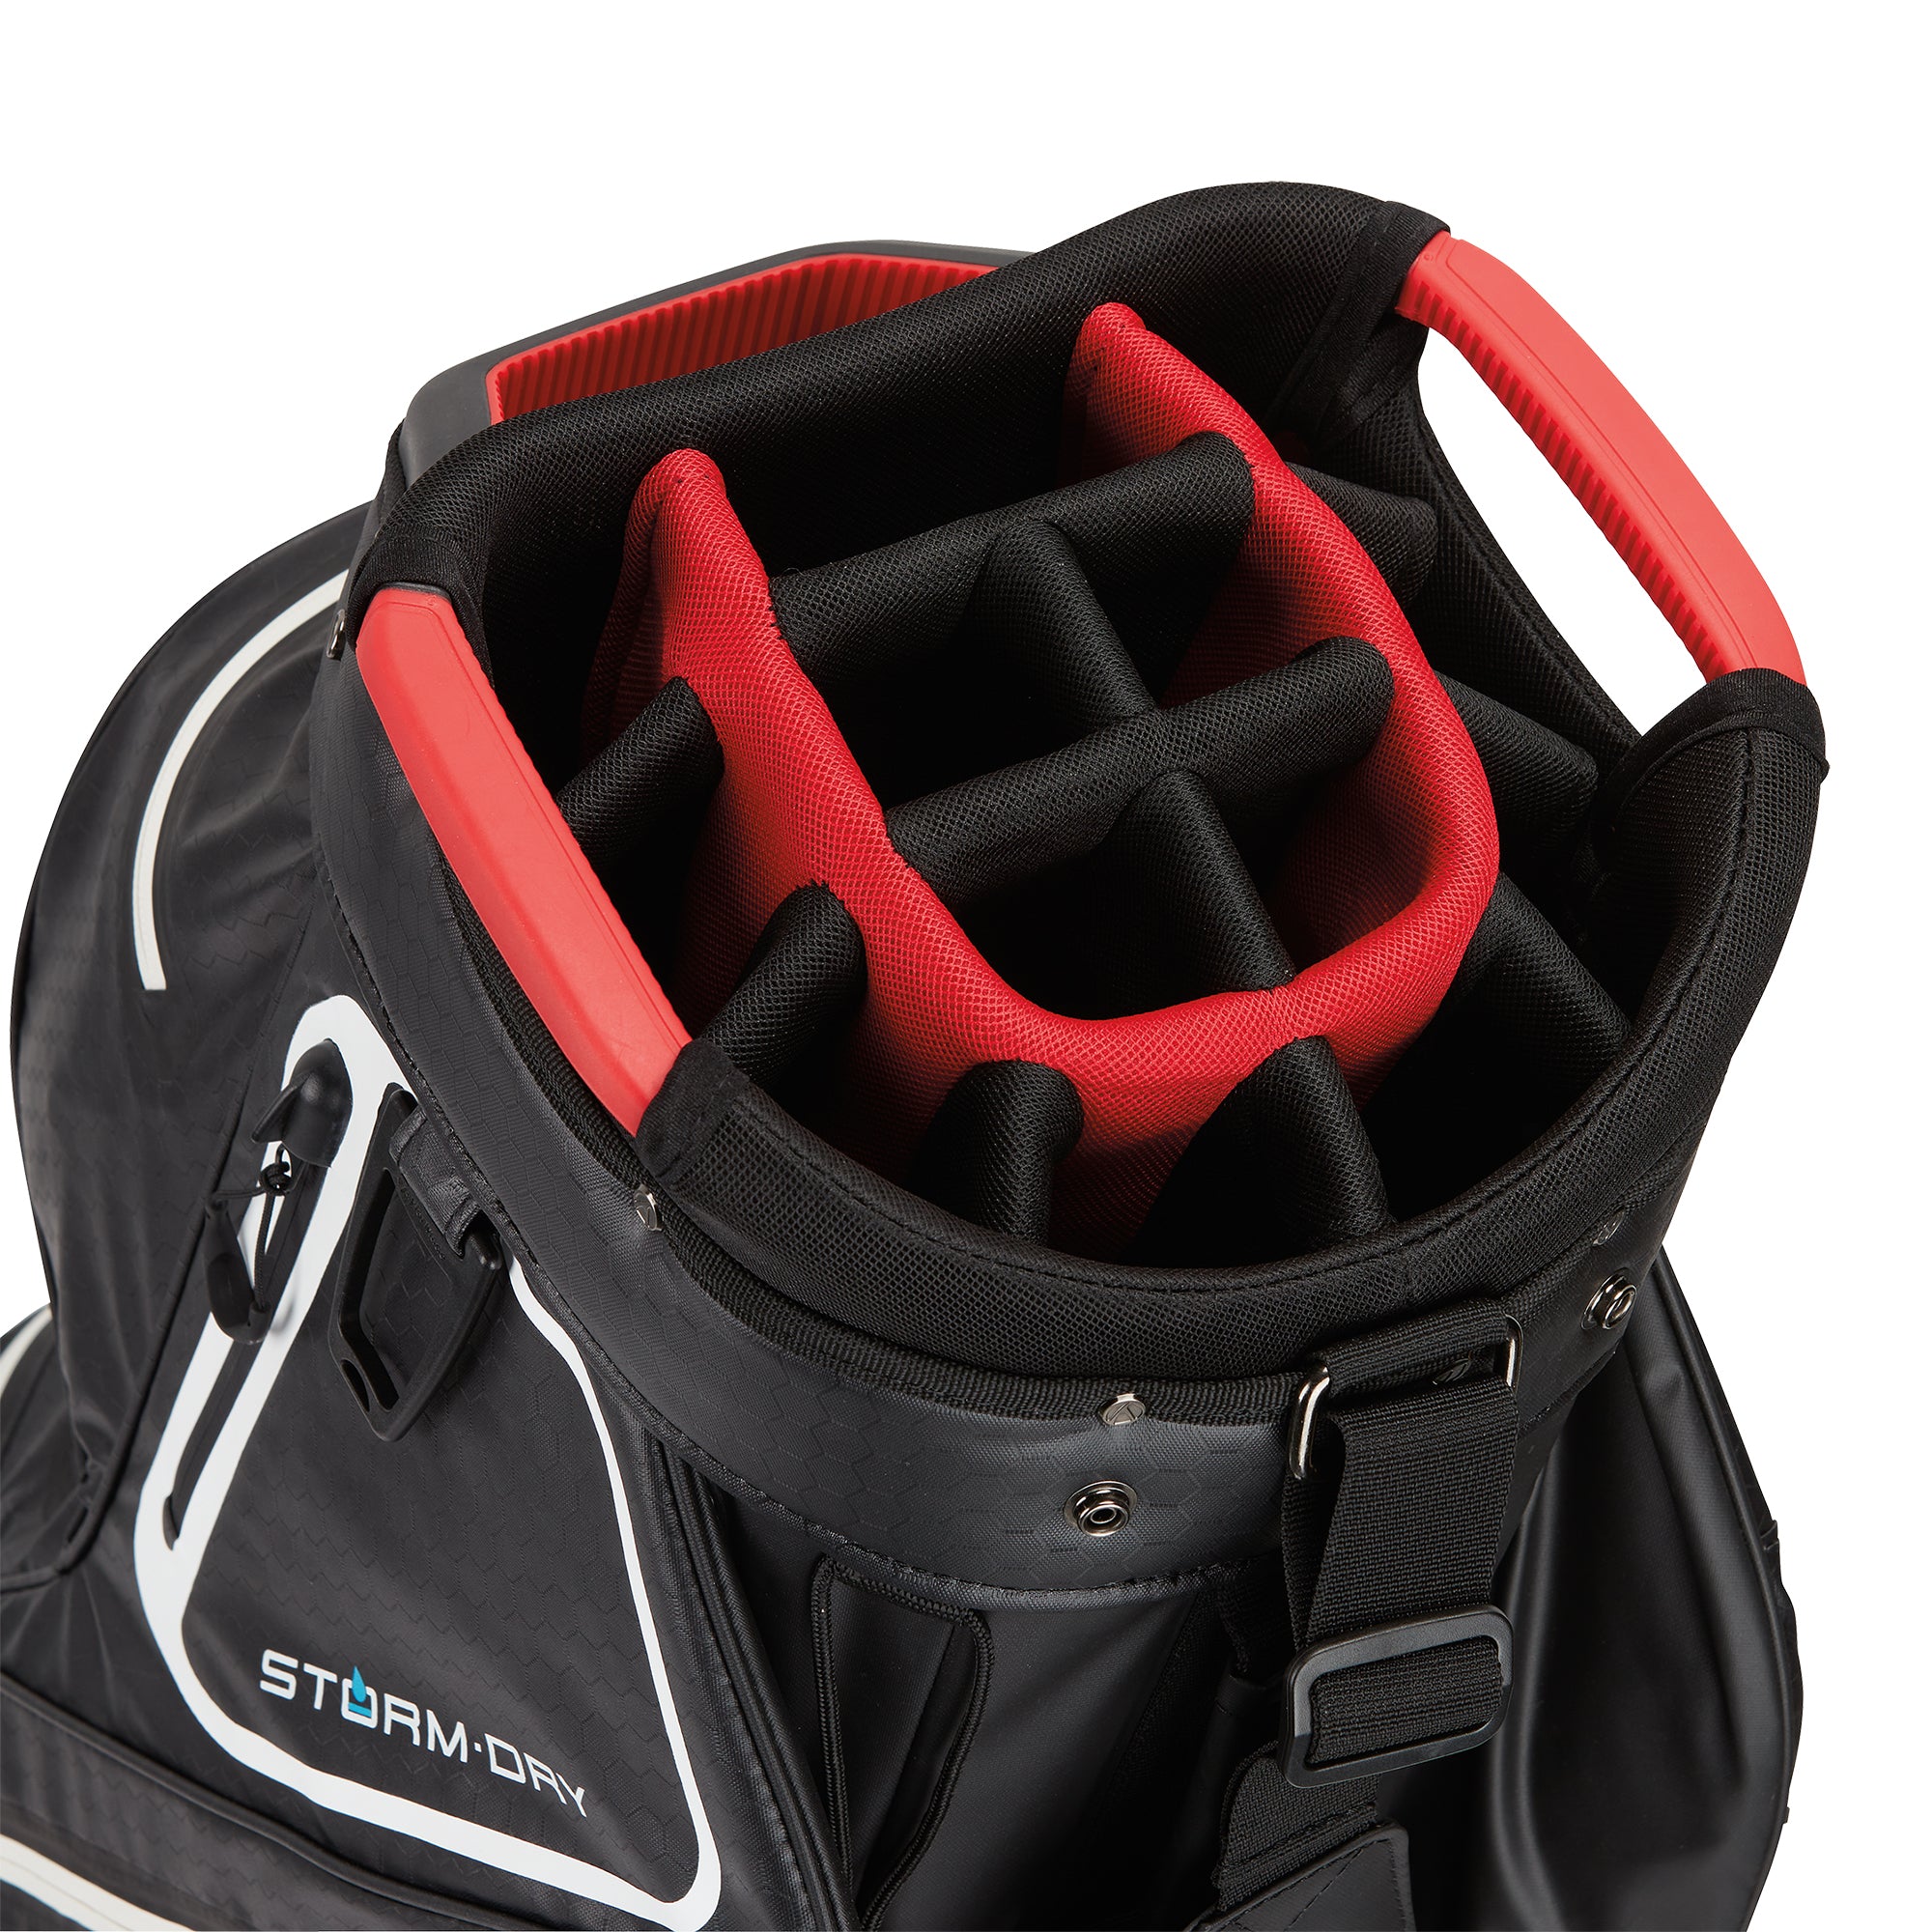 taylormade-deluxe-cart-golf-bag-v97168-black-white-red